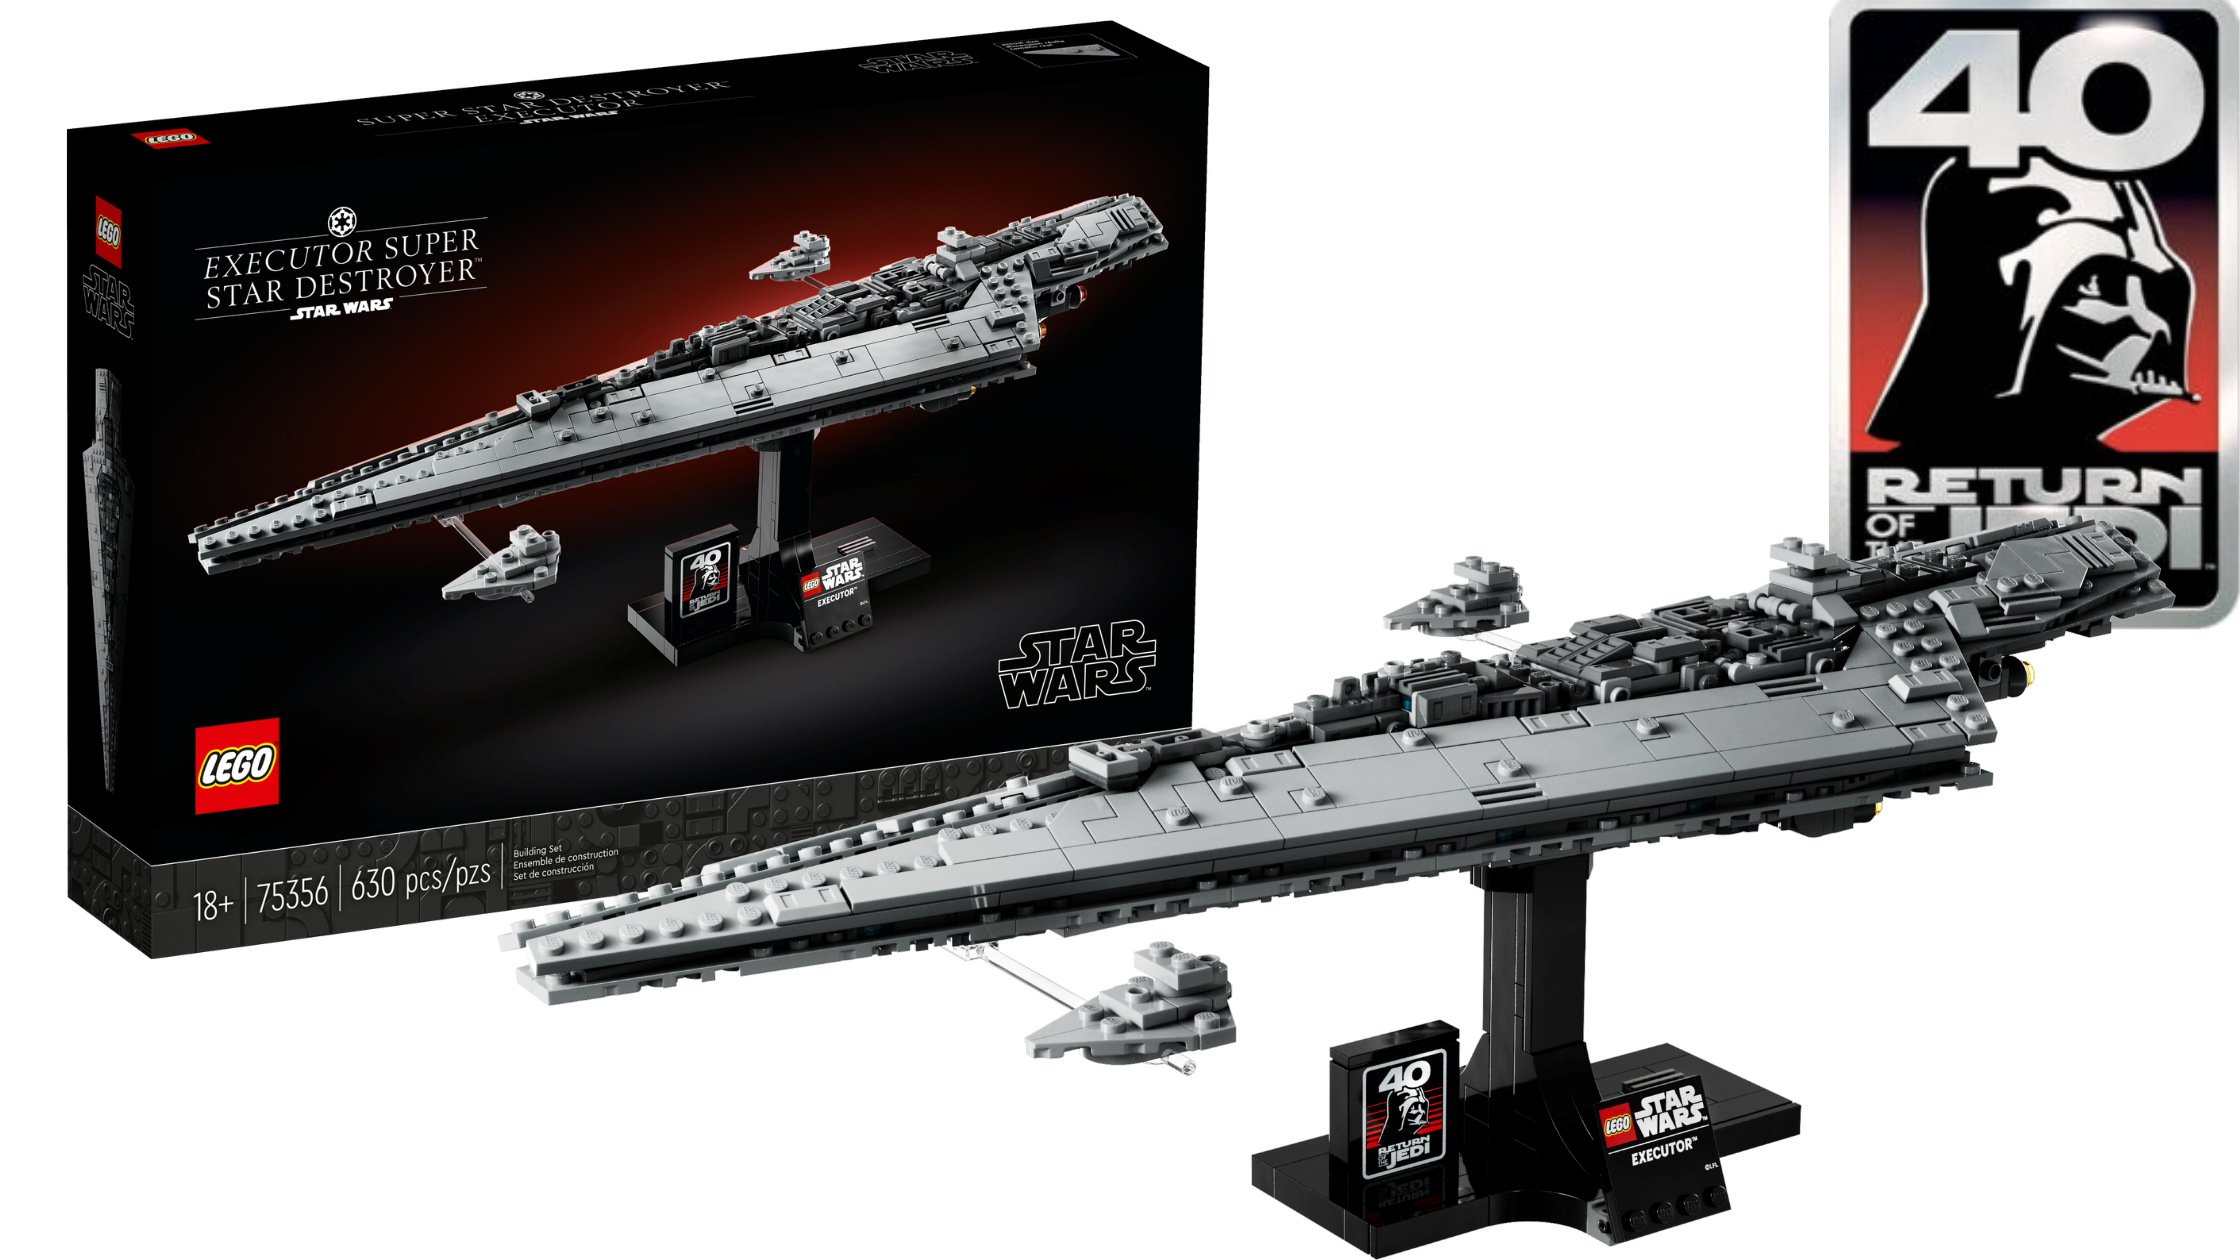 75356 Super Star Destroyer officially revealed with pre-orders open now! - Jay's Brick Blog